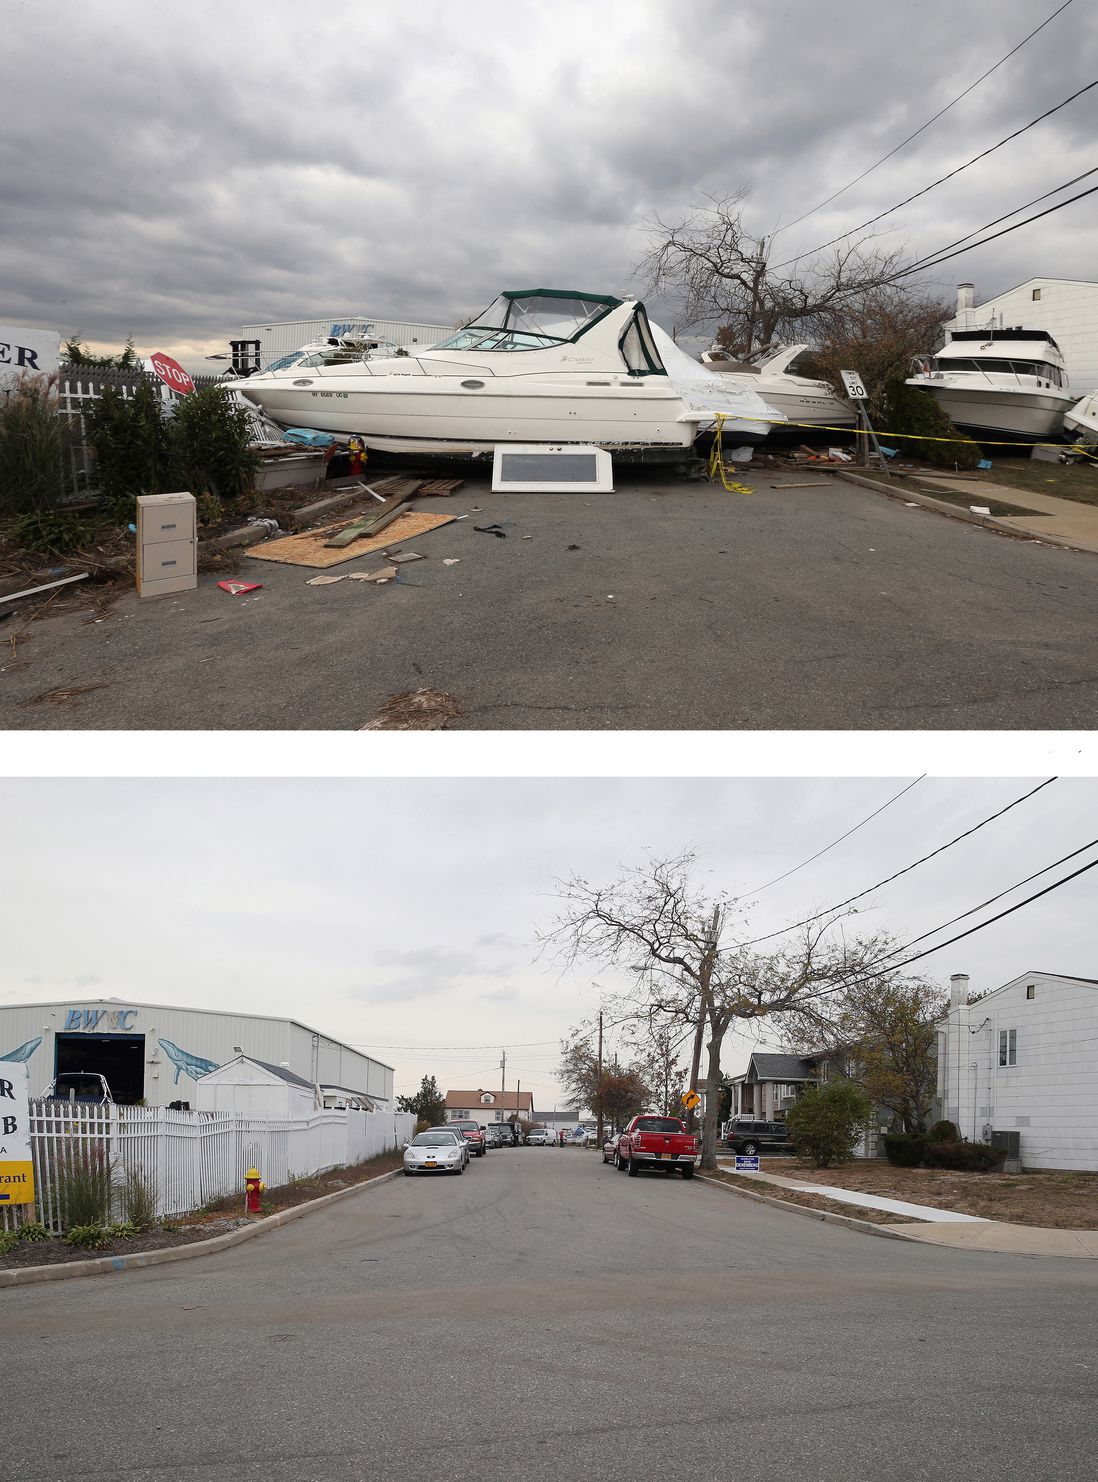 [Top] A boat from the Blue Water Club blocks Whaleneck Drive in the aftermath of Superstorm Sandy on November 1, 2012 in Merrick, New York. [Bottom] Cars sit parked on Whaleneck Drive, which had been littered with boats after Superstorm Sandy on October 22, 2013 in Merrick, New York.